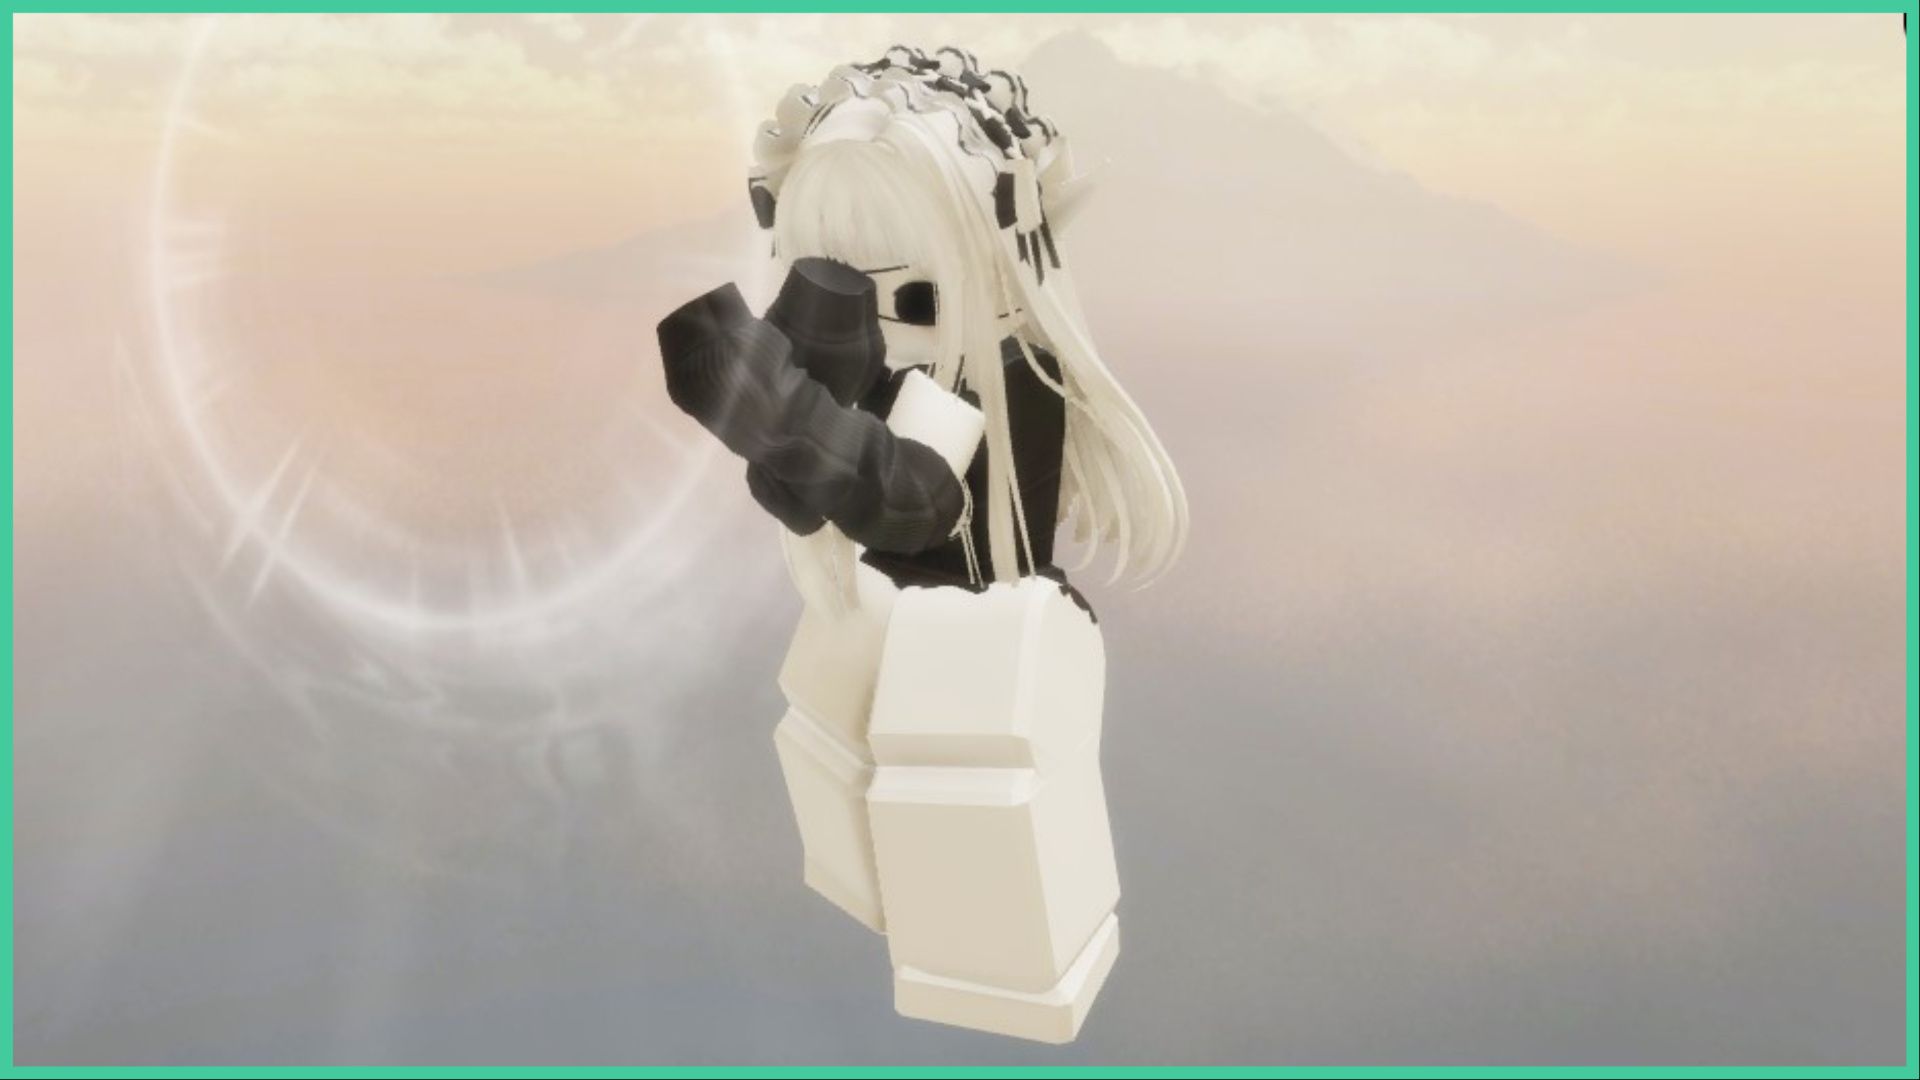 feature image for our boxing star simulator codes guide, the image features a screenshot of a roblox character holding their arms up to defend and strike a punch